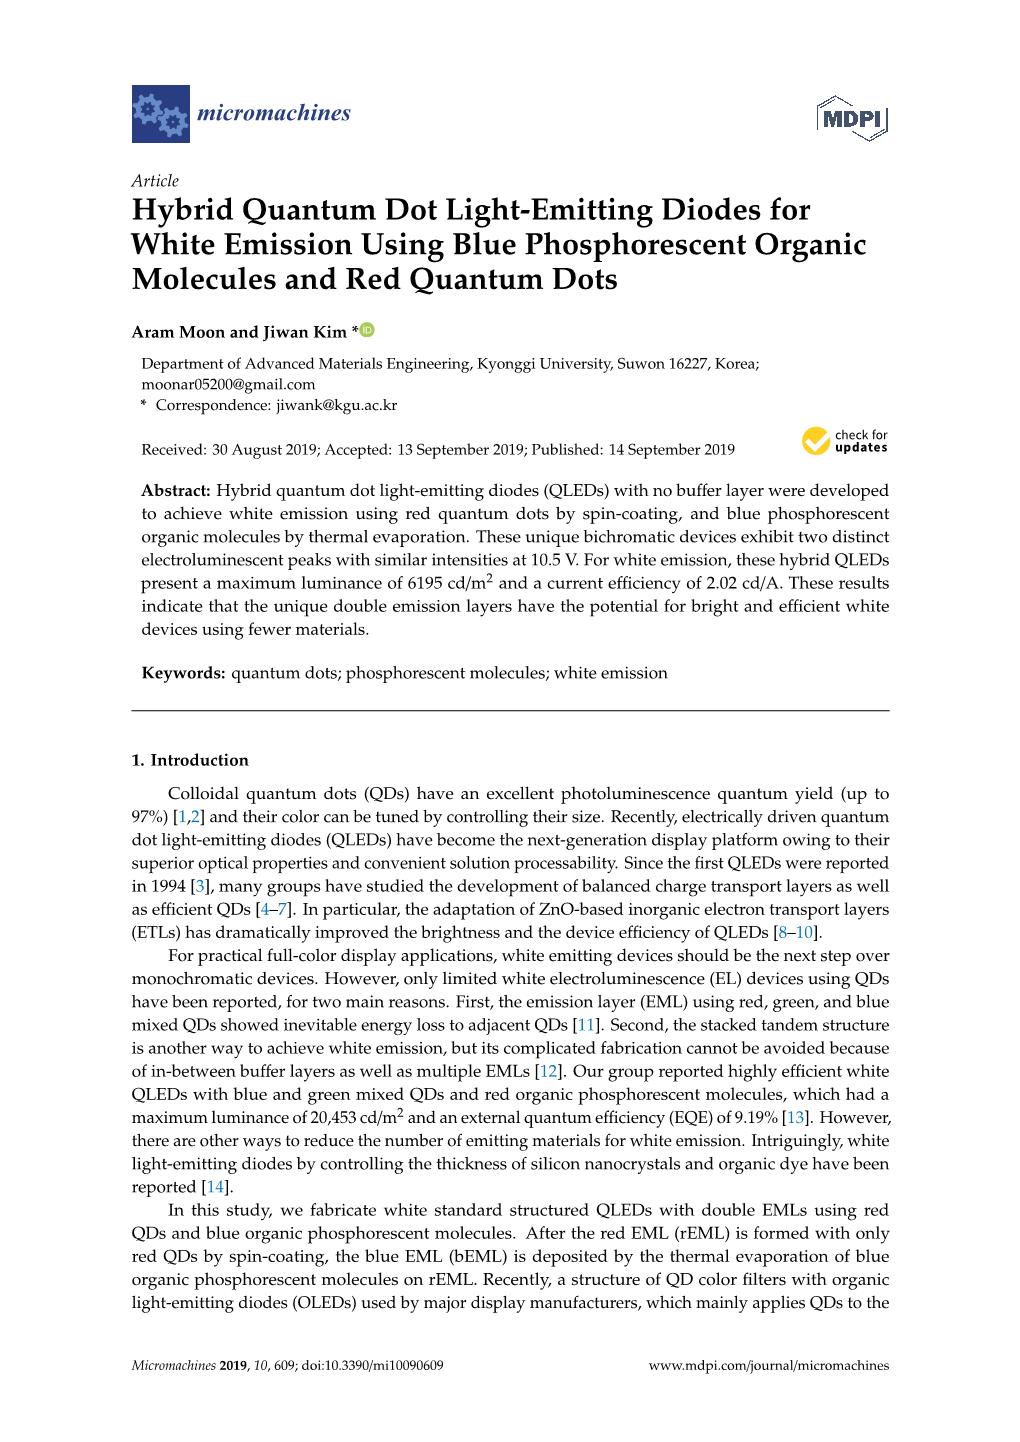 Hybrid Quantum Dot Light-Emitting Diodes for White Emission Using Blue Phosphorescent Organic Molecules and Red Quantum Dots